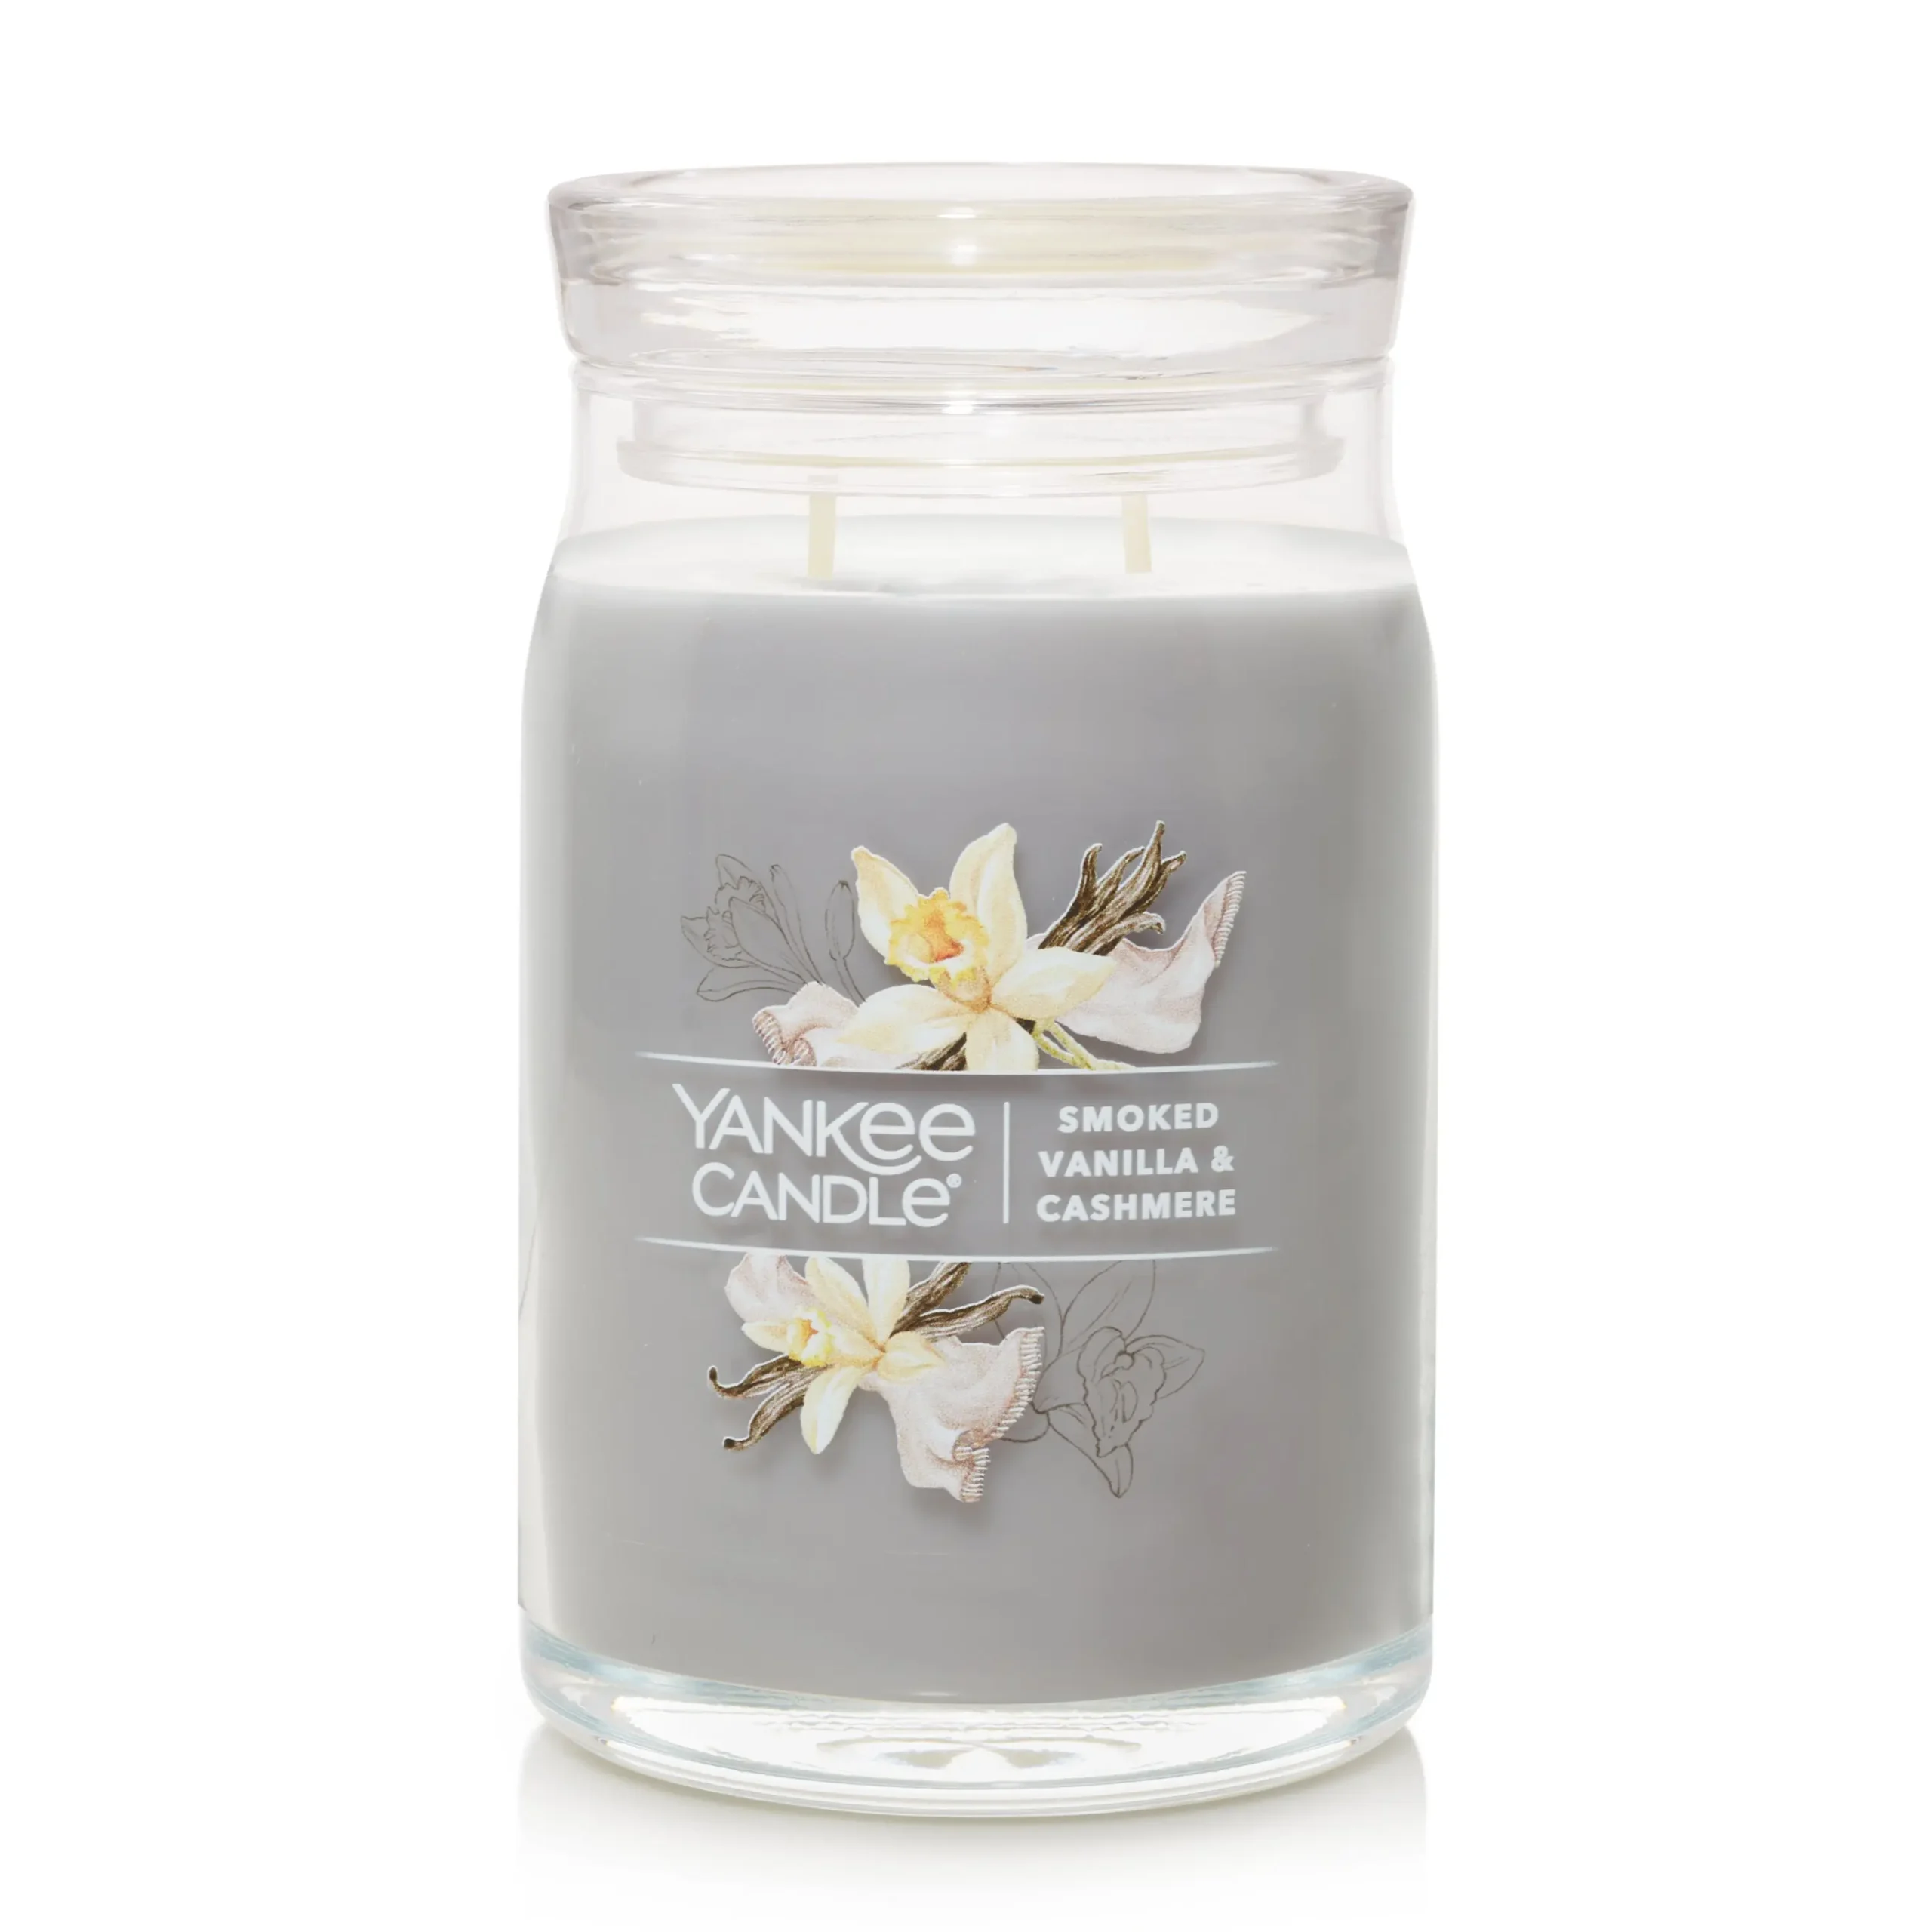 smoked vanilla and cashmere - What is the best smelling Yankee Candle